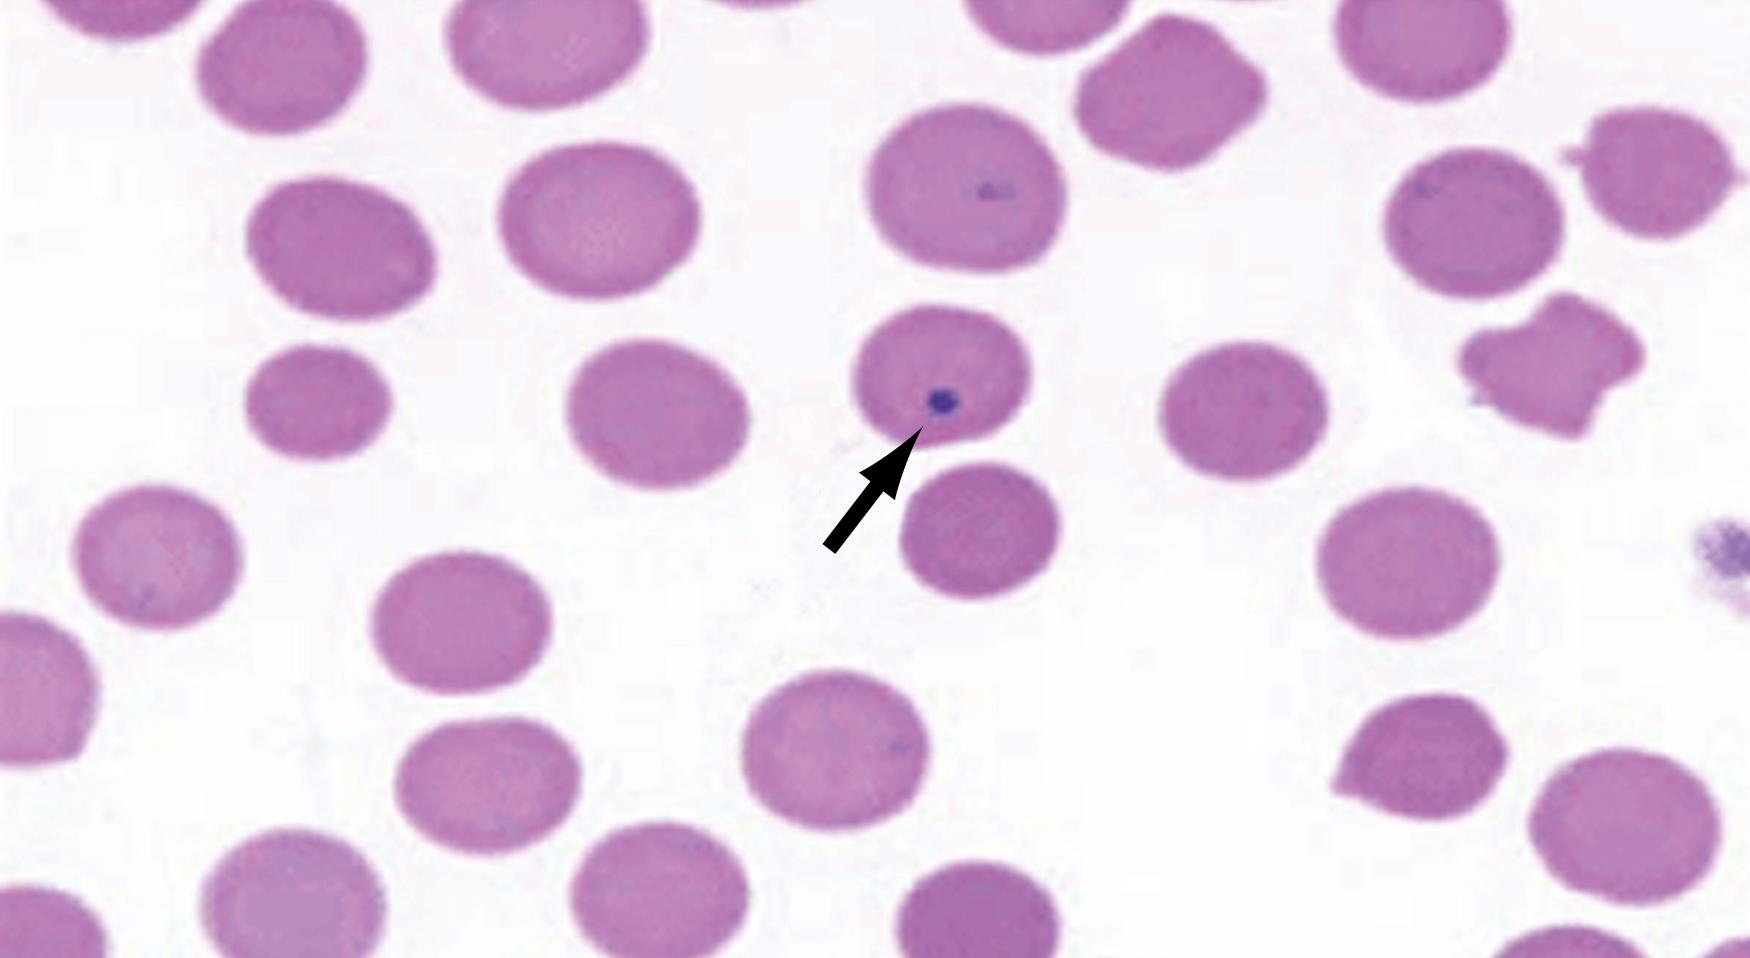 Fig. 57.6, The presence of Howell-Jolly bodies (arrow) on the peripheral blood smear is suggestive of asplenia or hyposplenism.